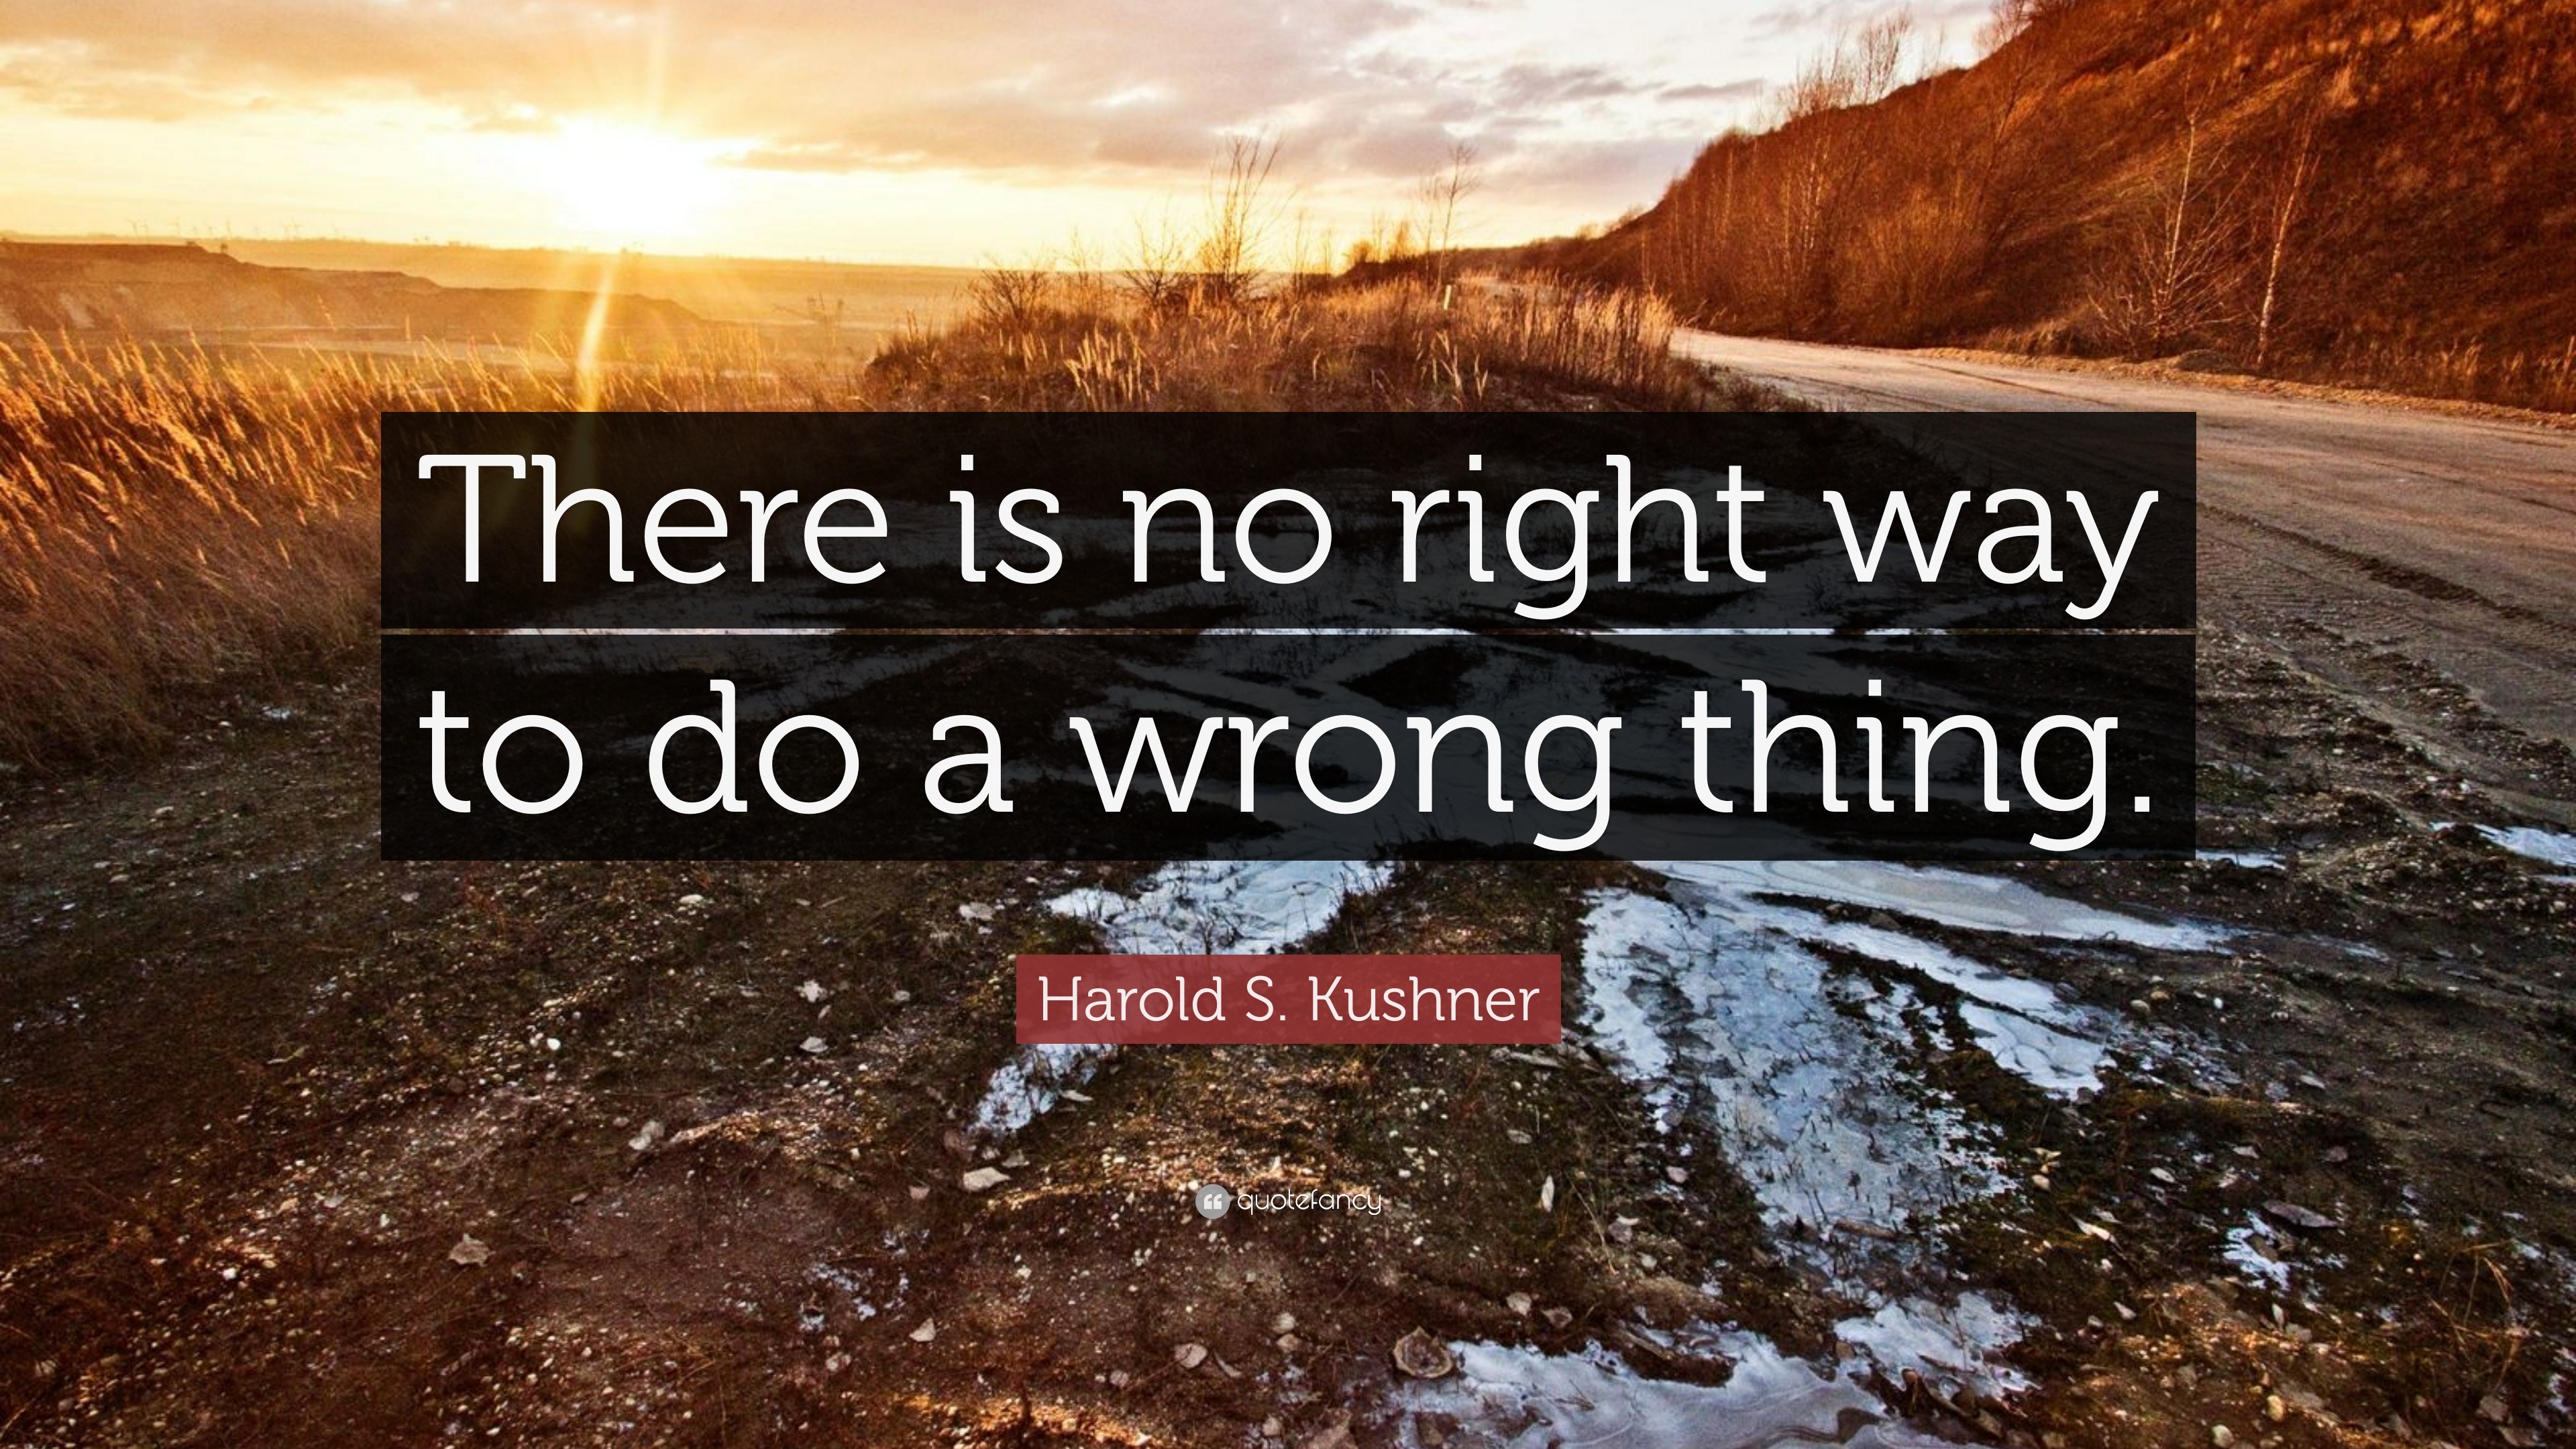 Harold S Kushner Quote “there Is No Right Way To Do A Wrong Thing”